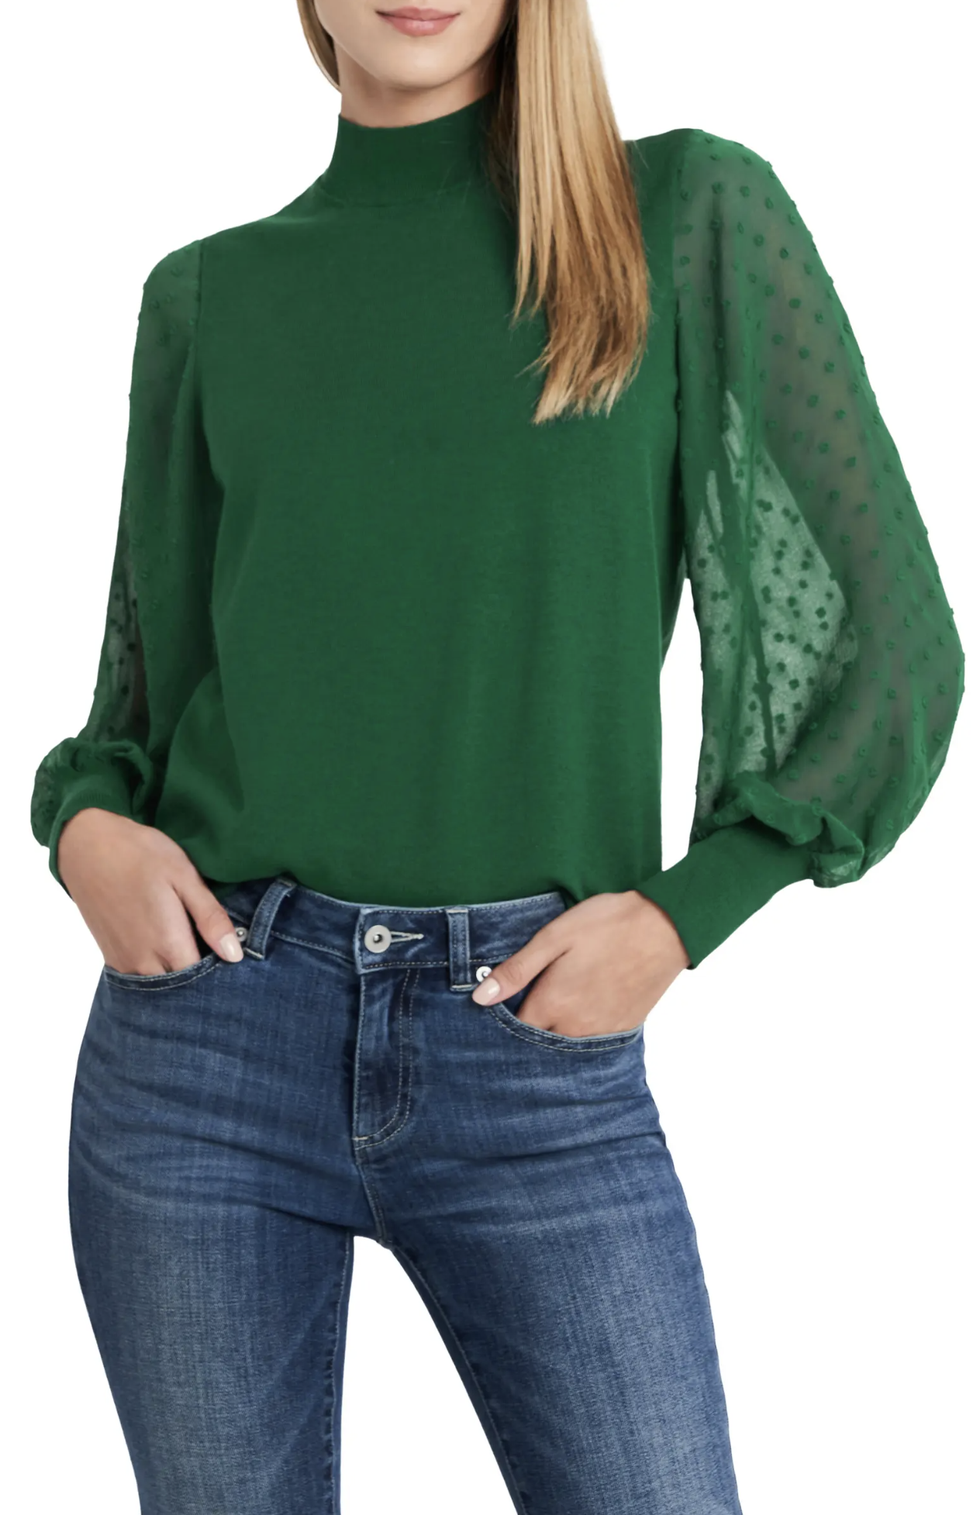 35 St. Patrick's Day Outfit Ideas for Women - Momma Review